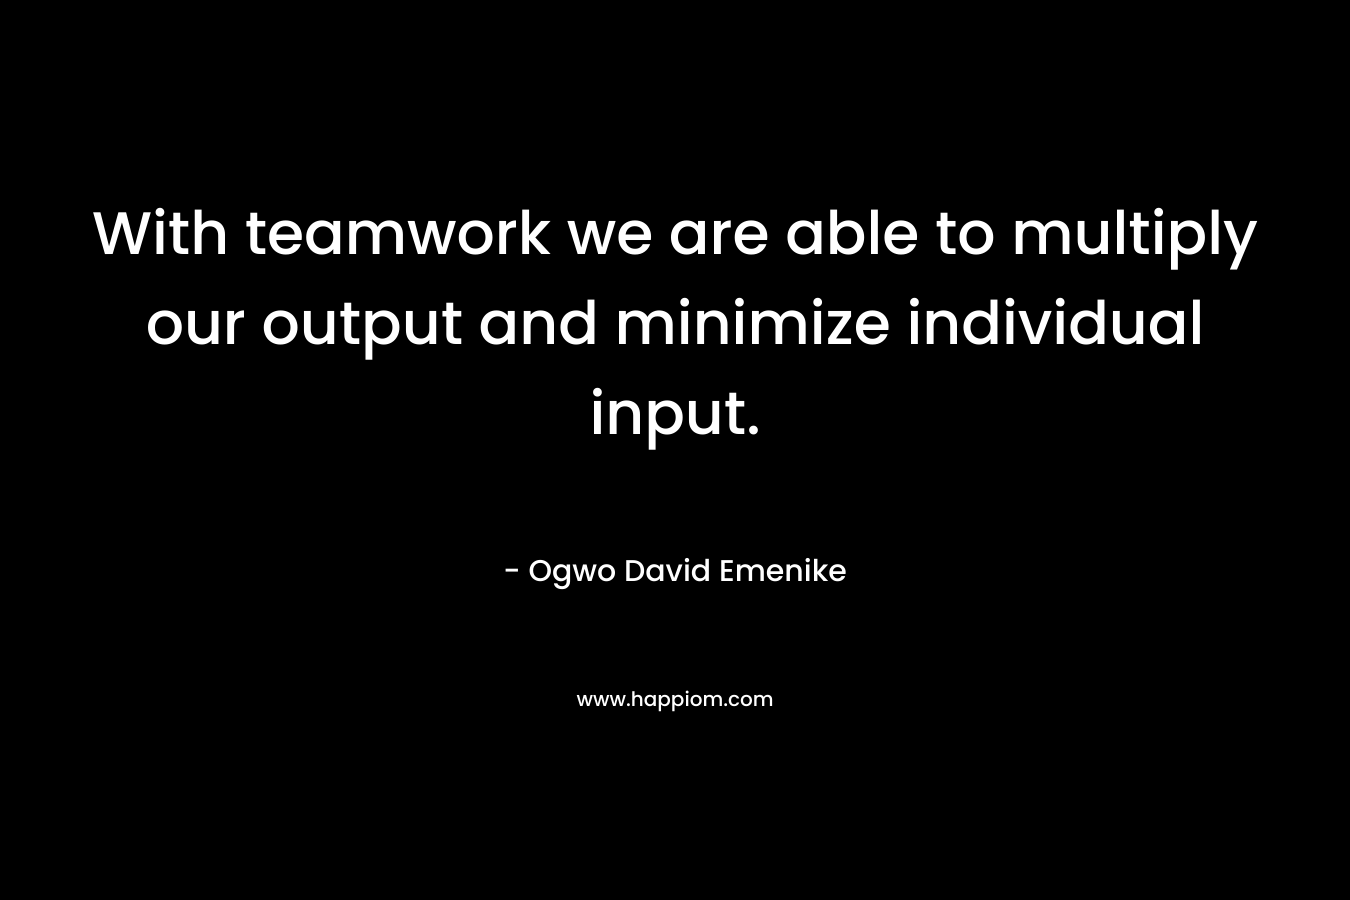 With teamwork we are able to multiply our output and minimize individual input. – Ogwo David Emenike